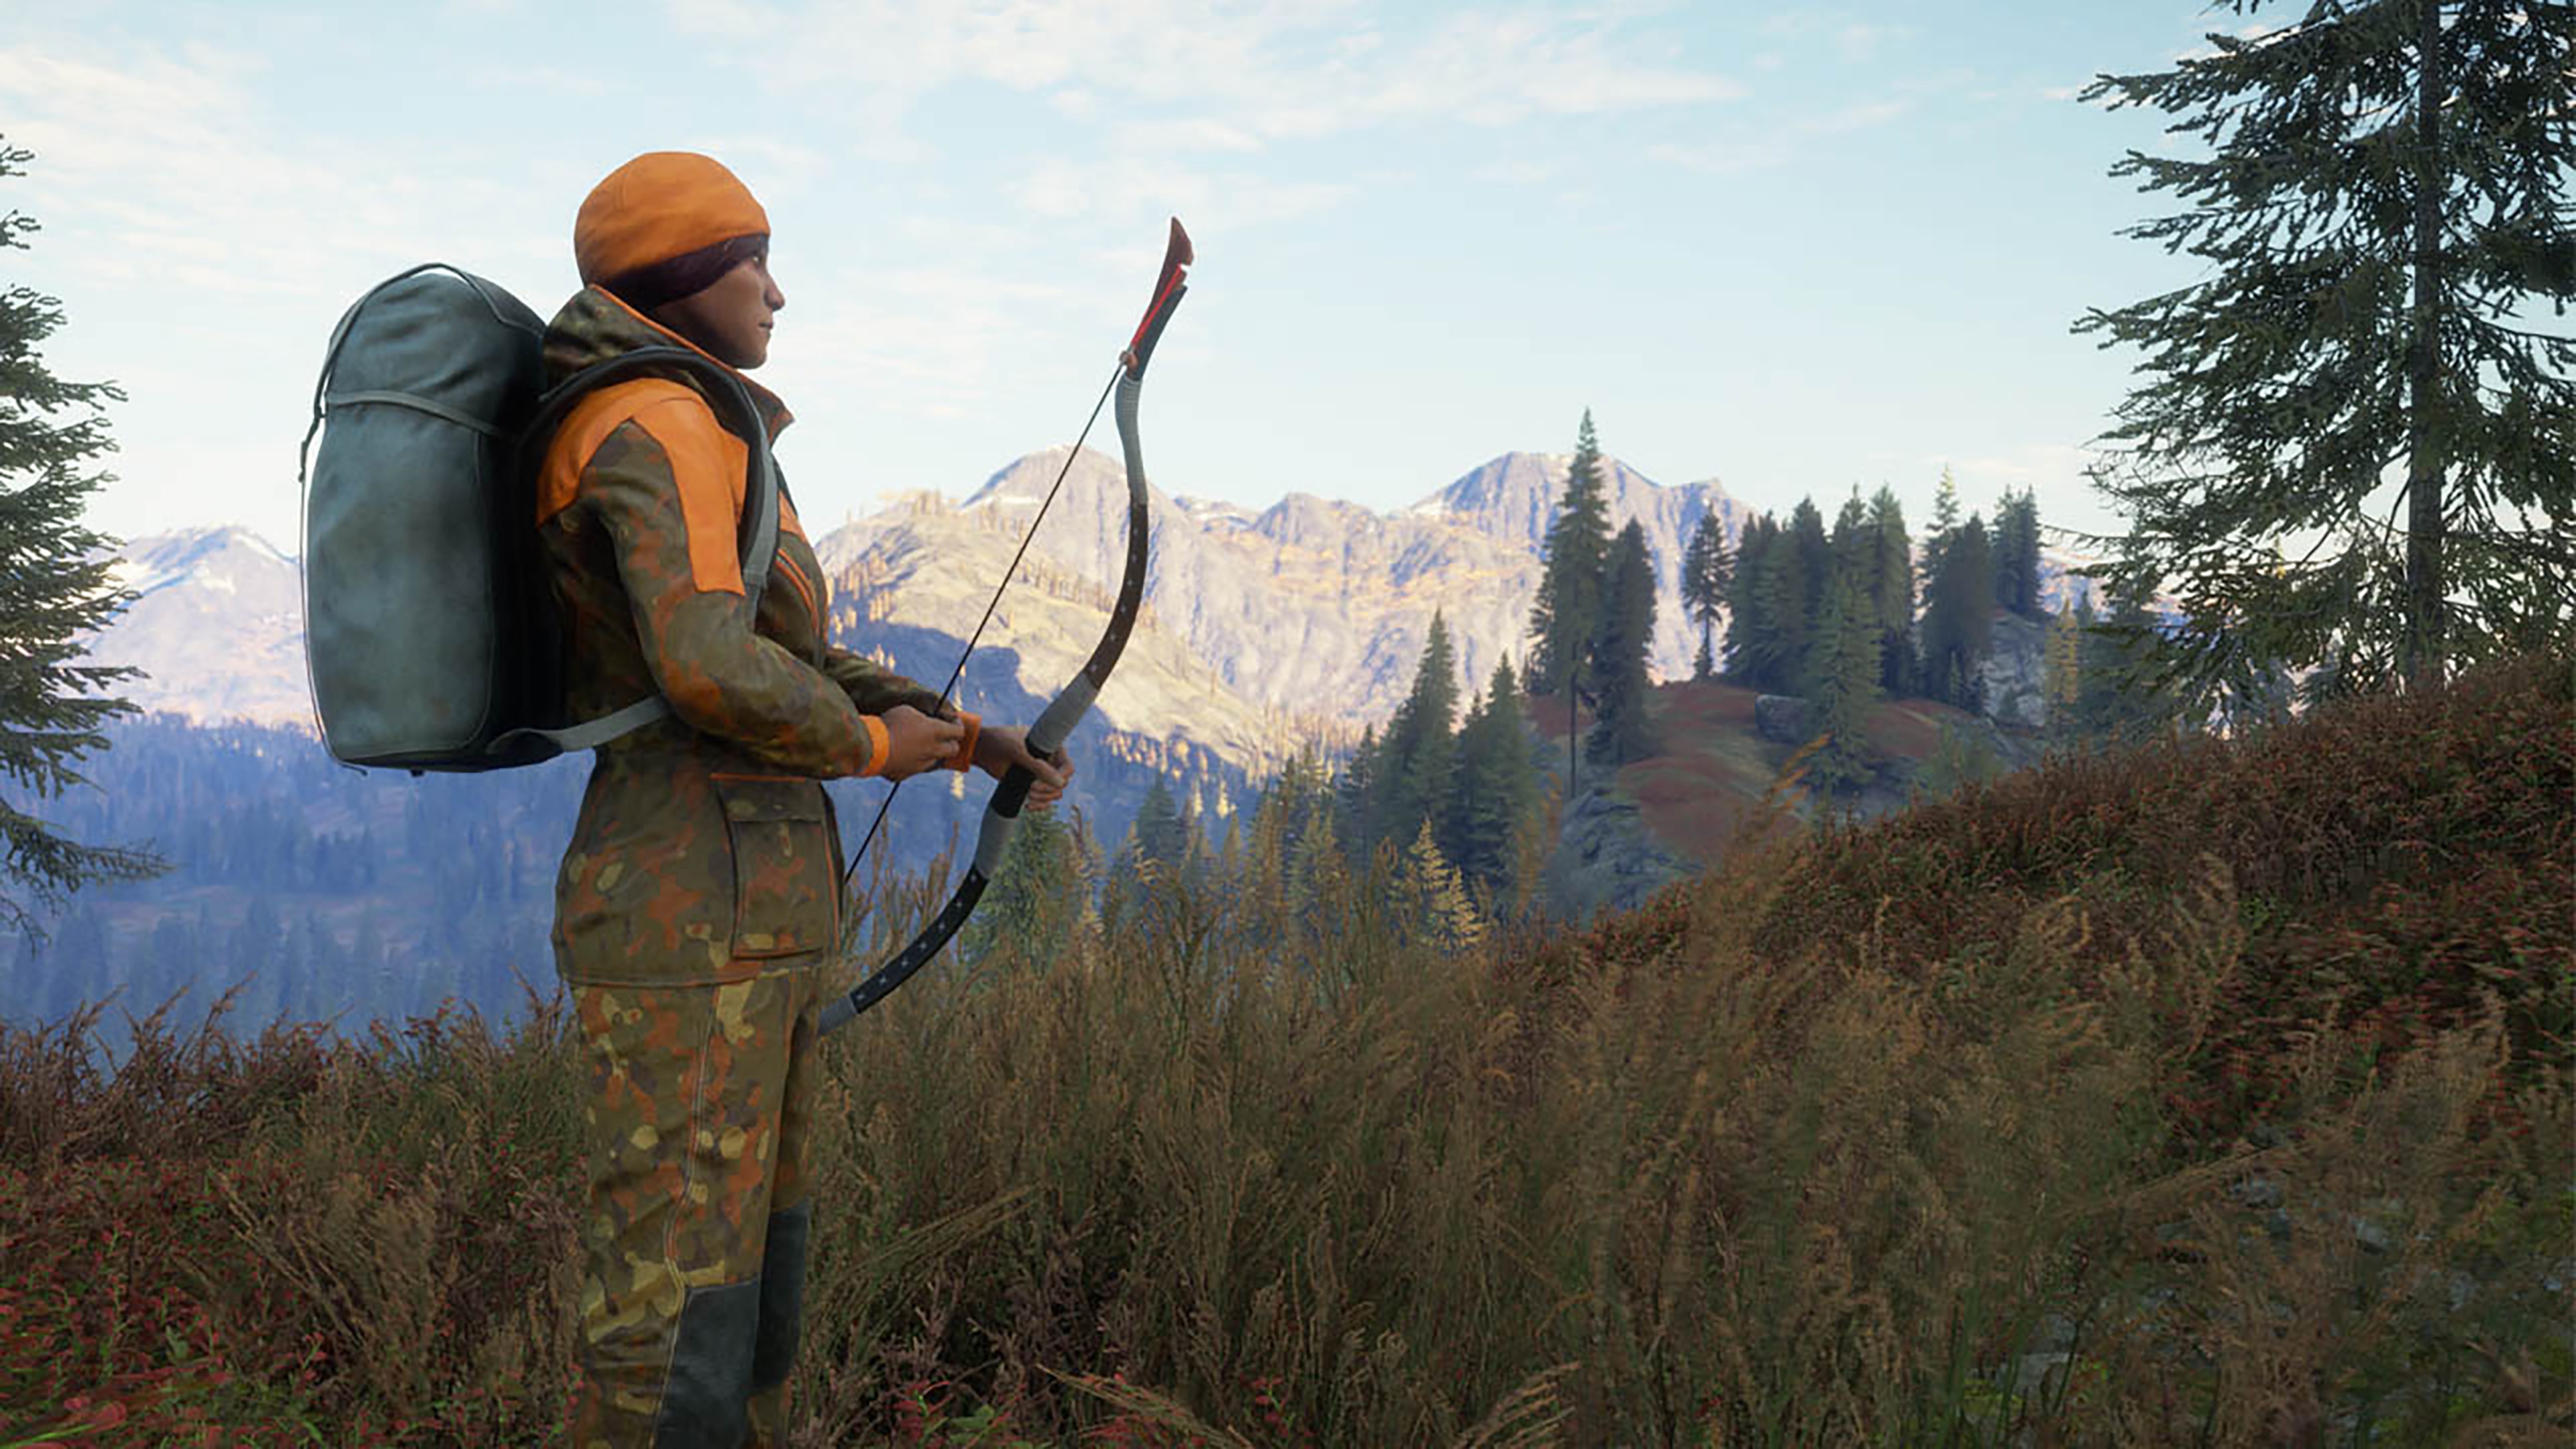 Thehunter. Игра the Hunter Call of the Wild. Игра охота the Hunter Call of the Wild. The Hunter Call of the Wild Yukon Valley. THEHUNTER Call of the Wild Weapon Pack.